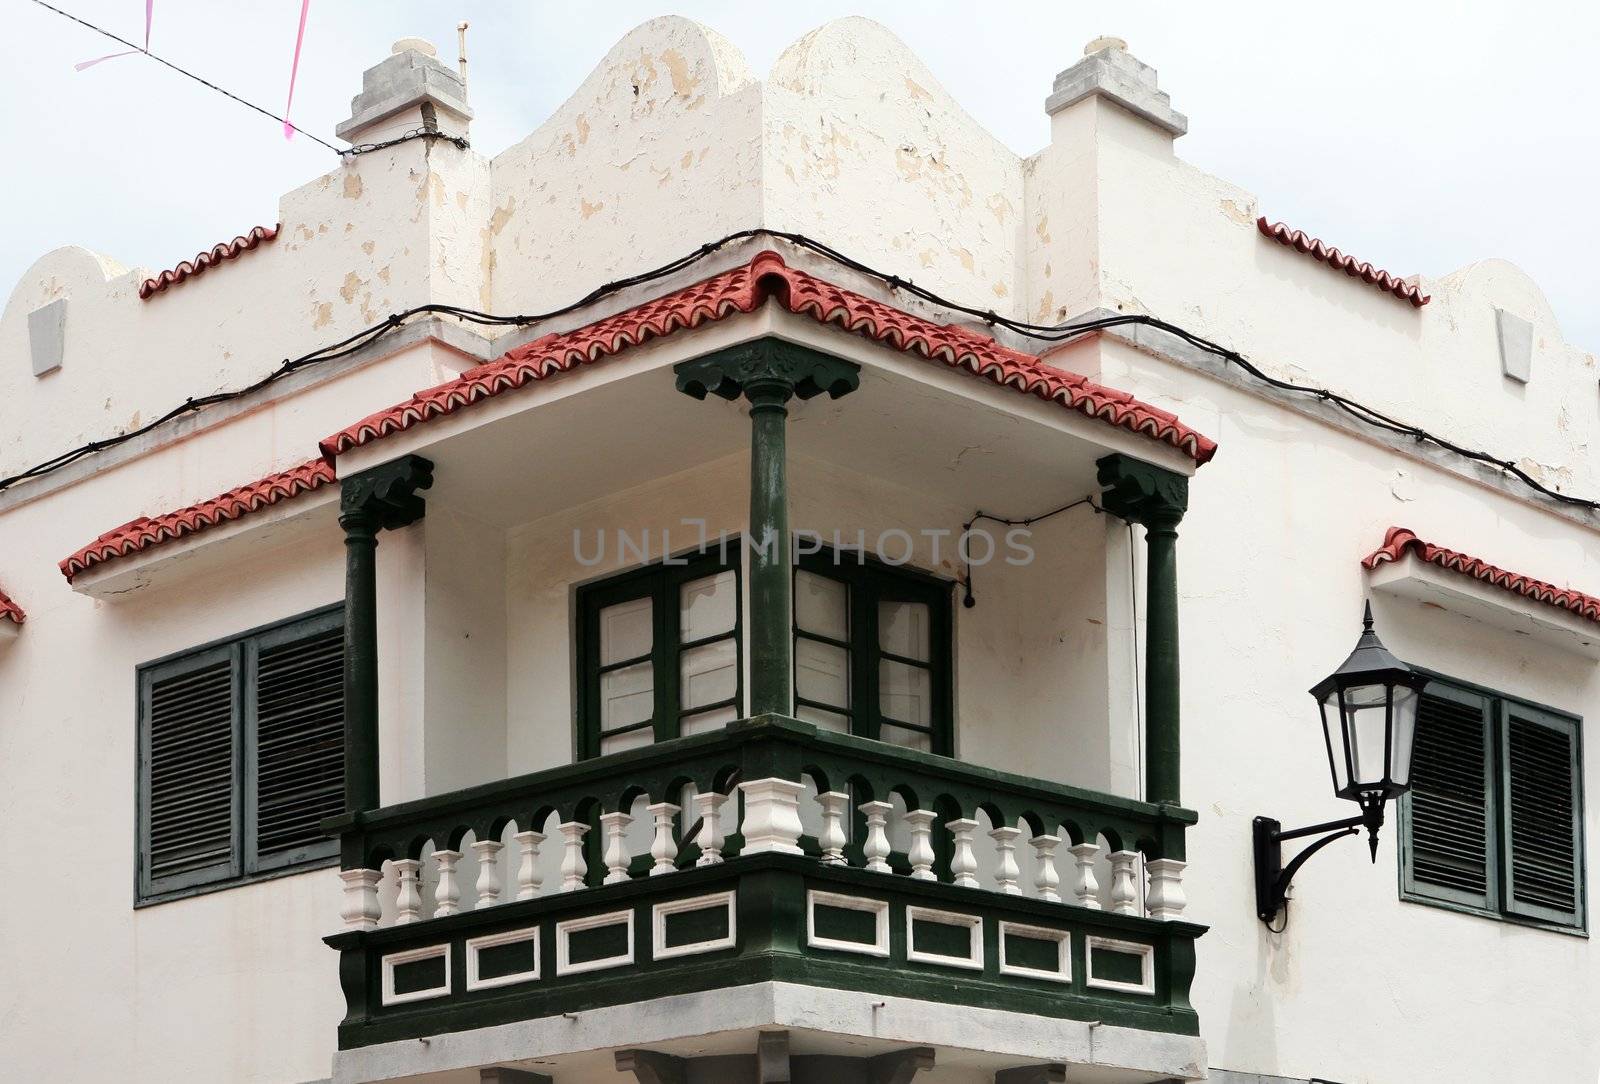 Detail of building in Garachico on Canary island